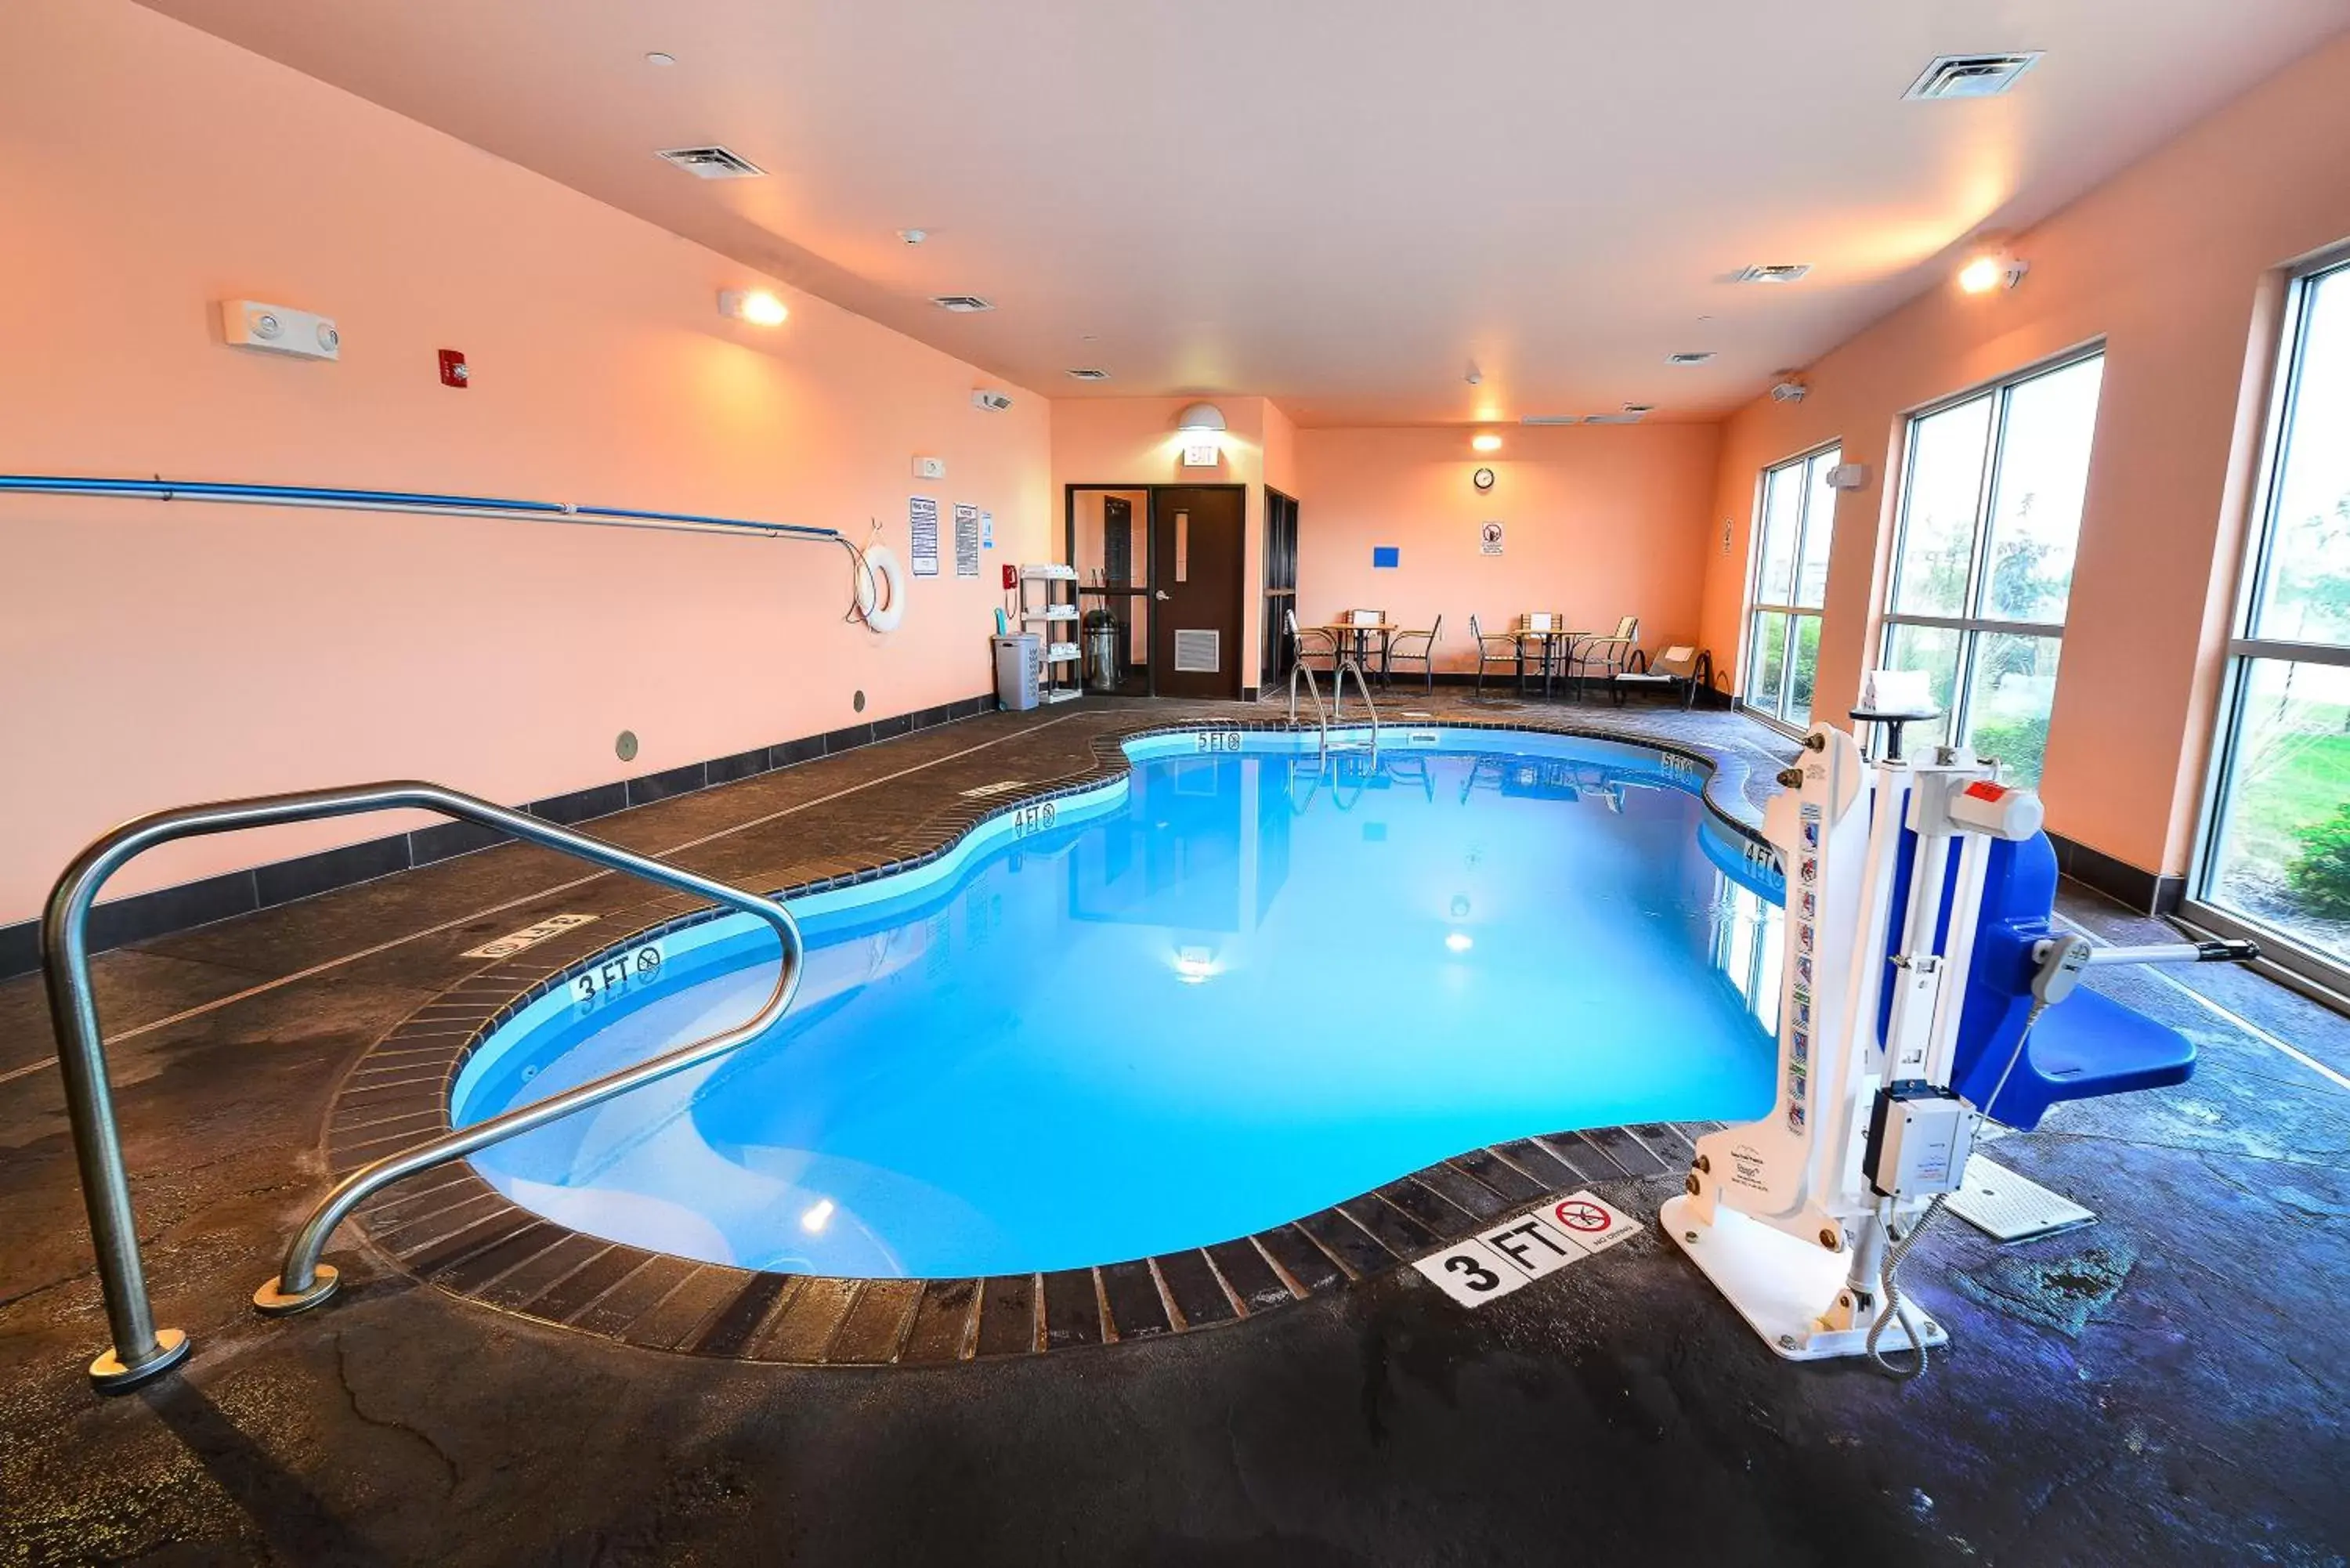 Swimming Pool in Baymont by Wyndham Grand Forks